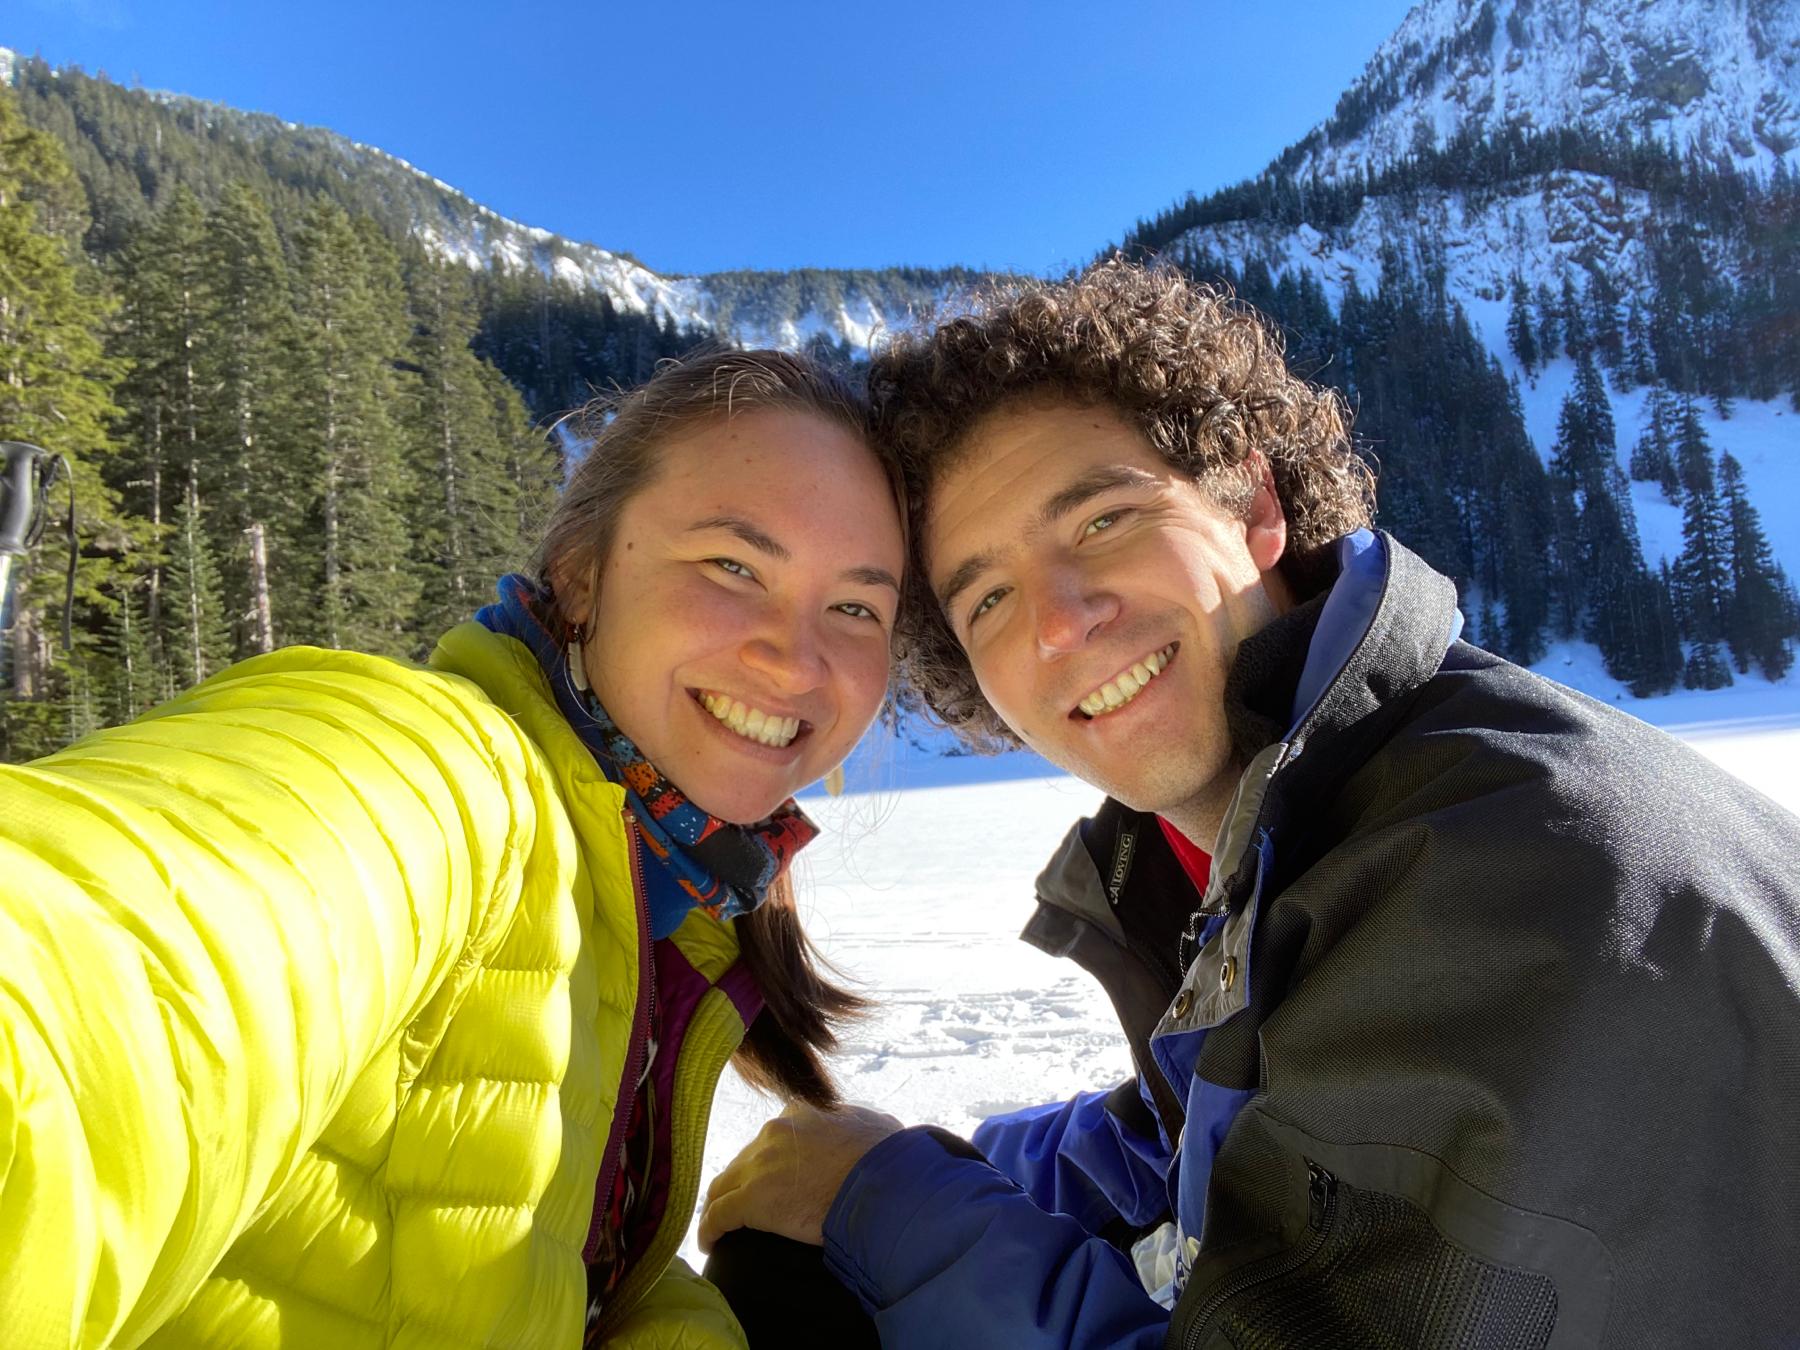 Our first snowy hike together! Annette Lake - January 2021